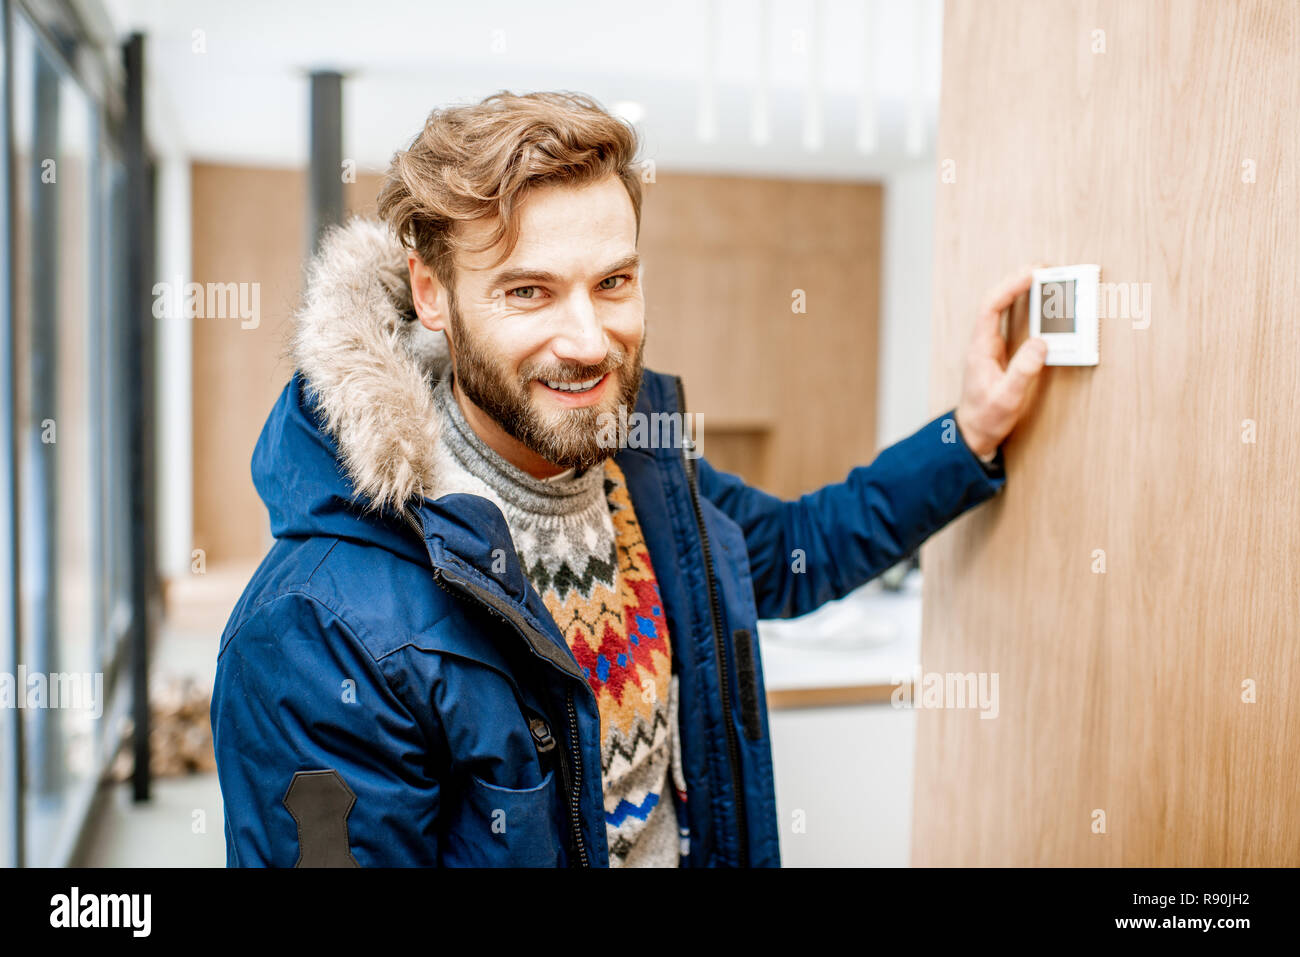 https://c8.alamy.com/comp/R90JH2/man-in-winter-clothes-feeling-cold-adjusting-room-temperature-with-electronic-thermostat-at-home-R90JH2.jpg